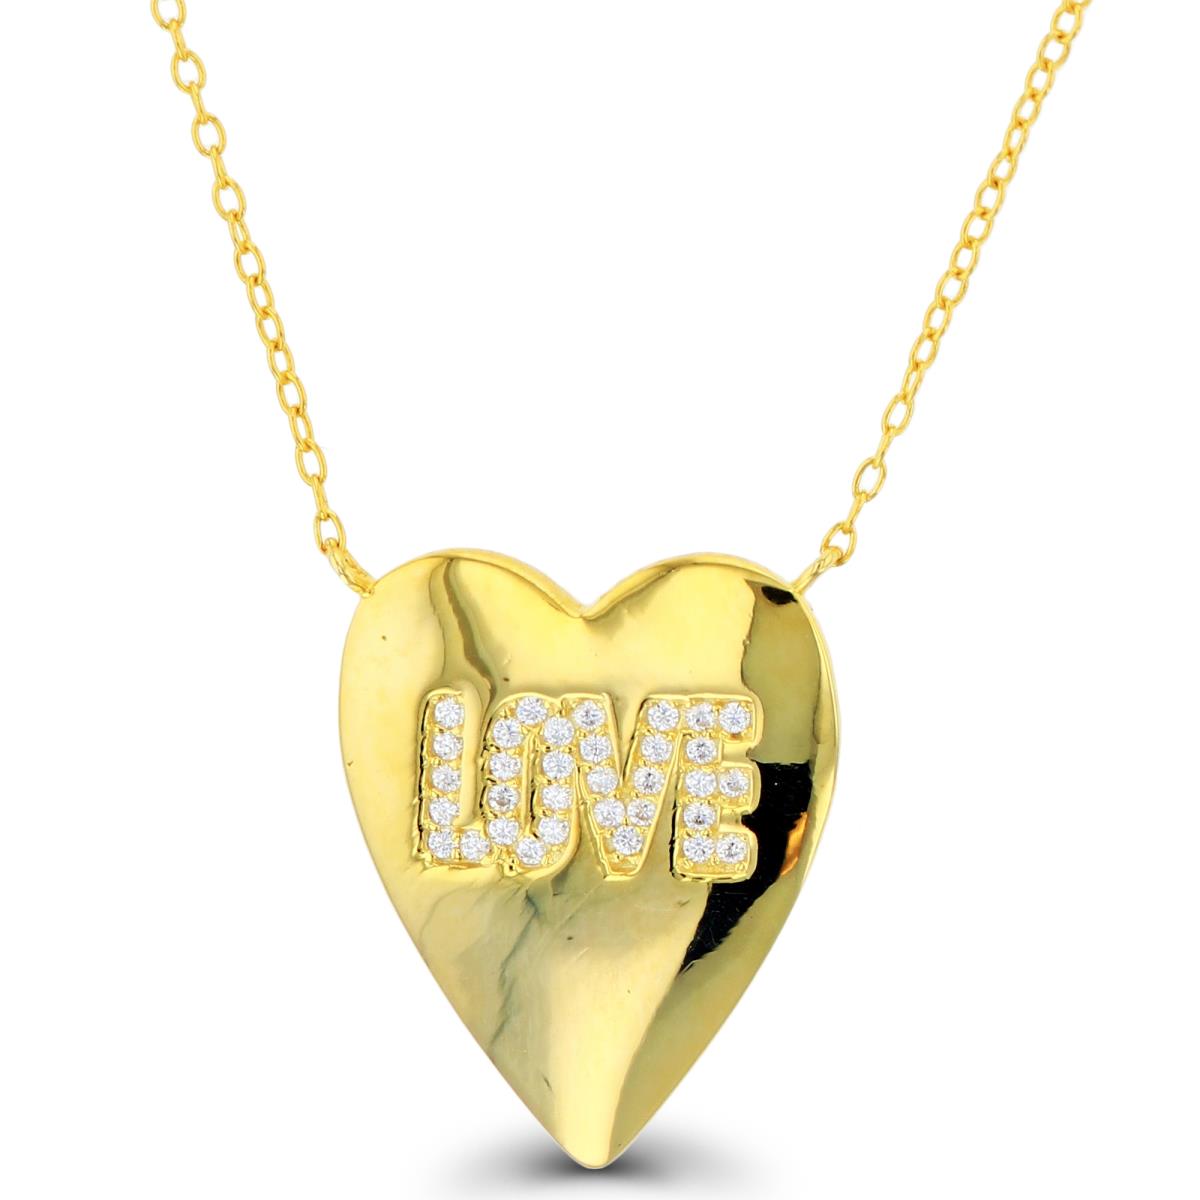 Sterling Silver+1Micron Yellow Gold Rnd White CZ "LOVE" Dome Heart 16+2"Necklace